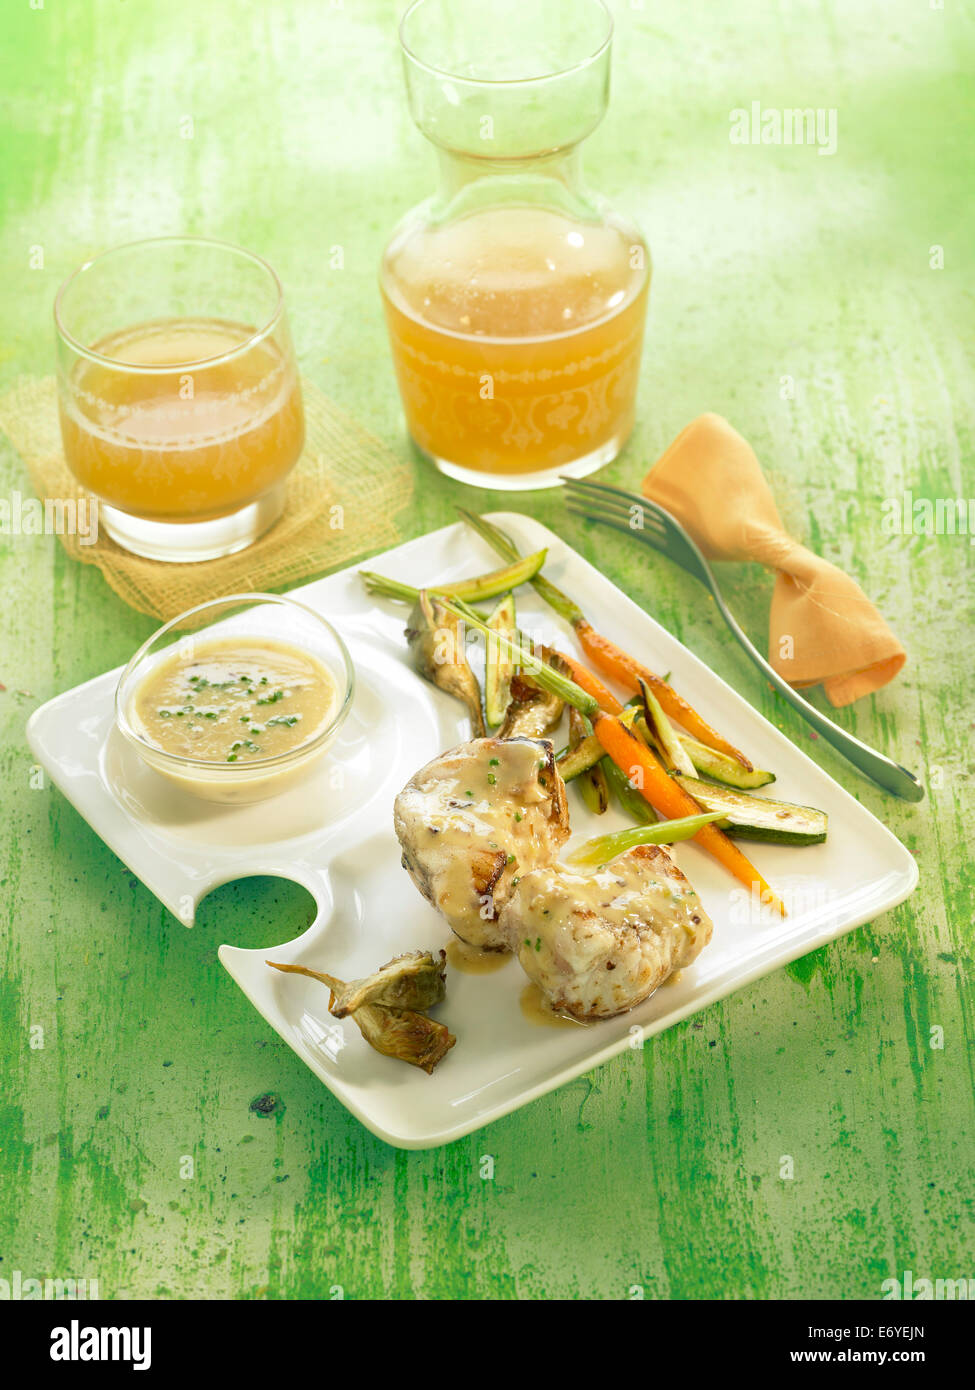 Monkfish,almond sauce and grilled vegetables Stock Photo